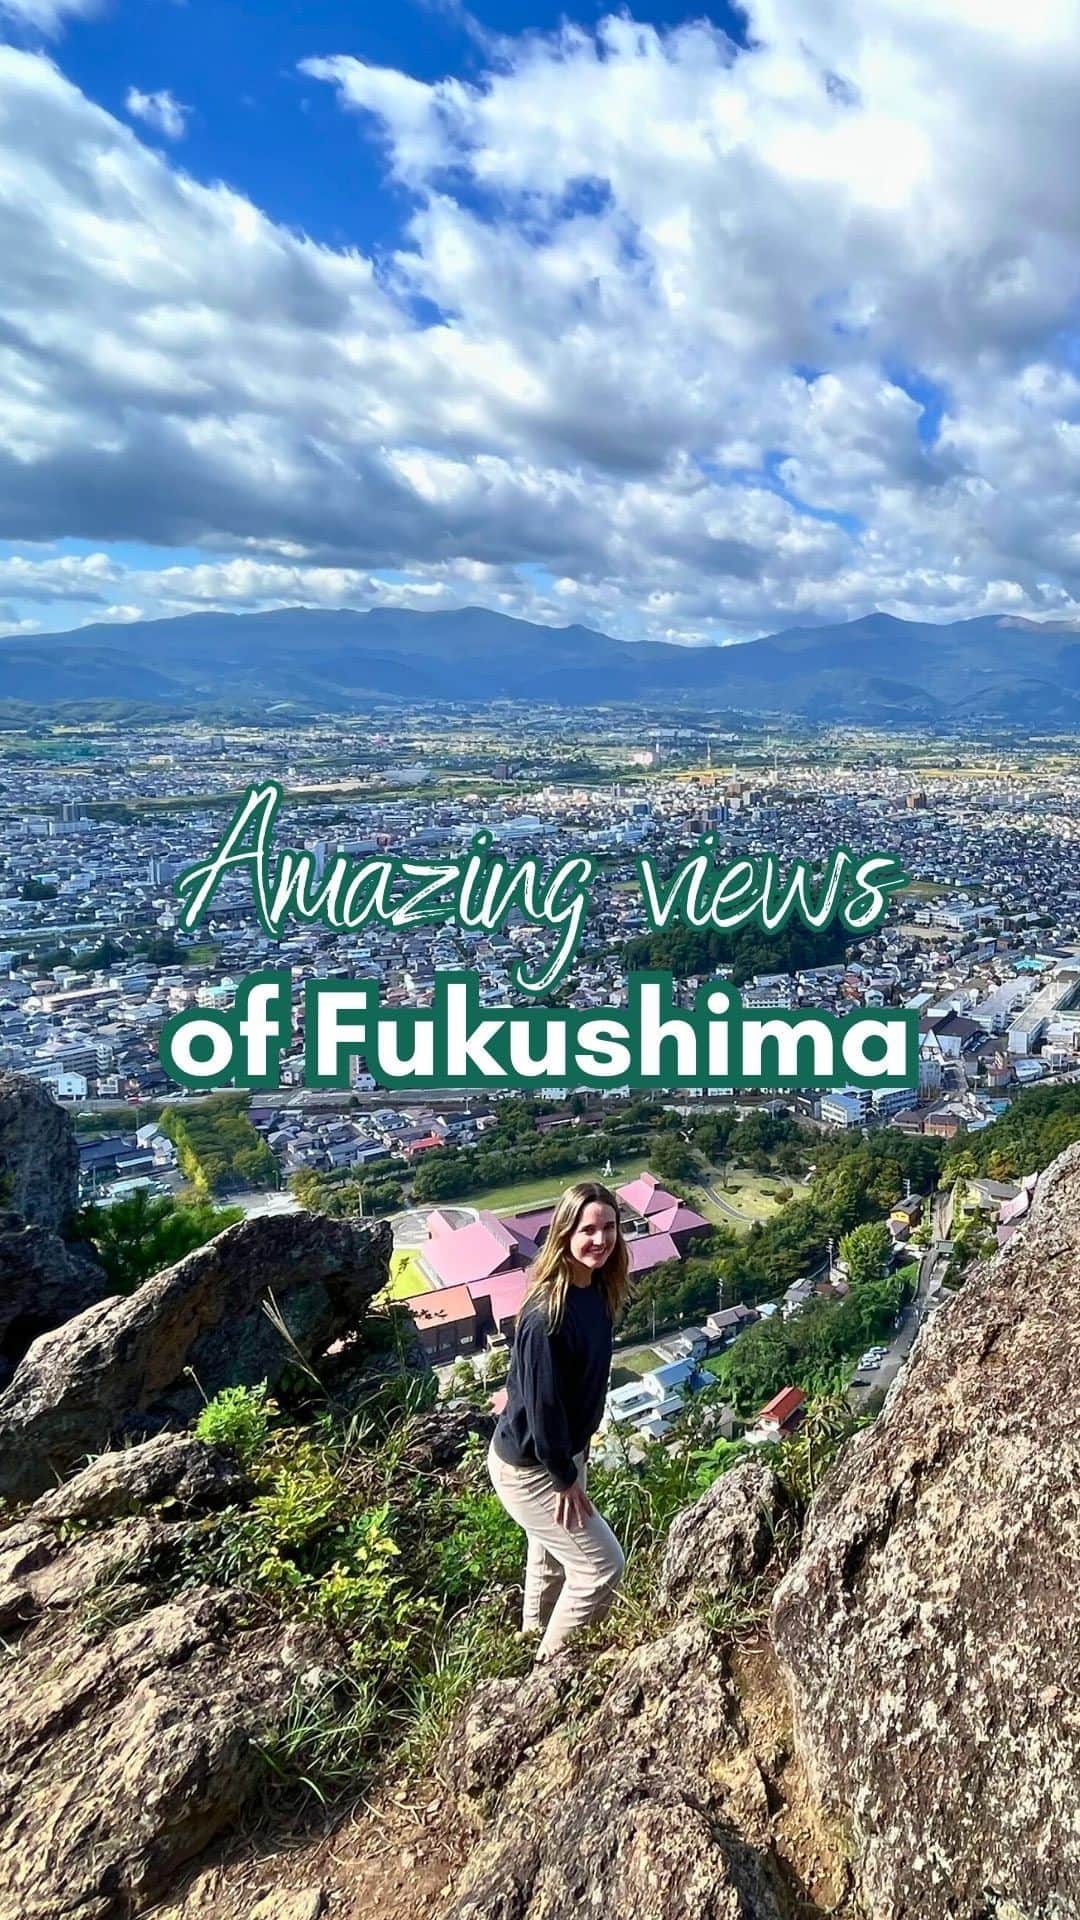 Rediscover Fukushimaのインスタグラム：「Fukushima City looks stunning from the Karasugasaki Observation Deck on the western side of Mt. Shinobu! 🤩  ⛰️ Mt. Shinobu is one of the landmarks of Fukushima City, and the best part is that it is easily accessible from the JR/Shinkansen Fukushima Station!   Whether you are looking for a cool autumn hike or a scenic drive with incredible views, this spot will surely not disappoint! 🙌  Have you ever been to Mt. Shinobu? How was it?  Let us know in the comments, and don’t forget to save this post for your next visit! 🔖  #visitfukushima #fukushima #mtshinobu #visitjapanjp #visitjapanau #visitjapantw #visitjapanphilippines #visitjapanus #japantravel #japantrip #jrpass #japanautumn #japanhiddengems #wanderlust #beautifulplaces #beautifuldestinations #beautifuljapan #japanviews #japanmountains #tohokutravel #tohoku #tohokutrip #beautiful #tohokutourism #instagood #japanreels #shinobuyama #福島 #福島市 #福島観光」